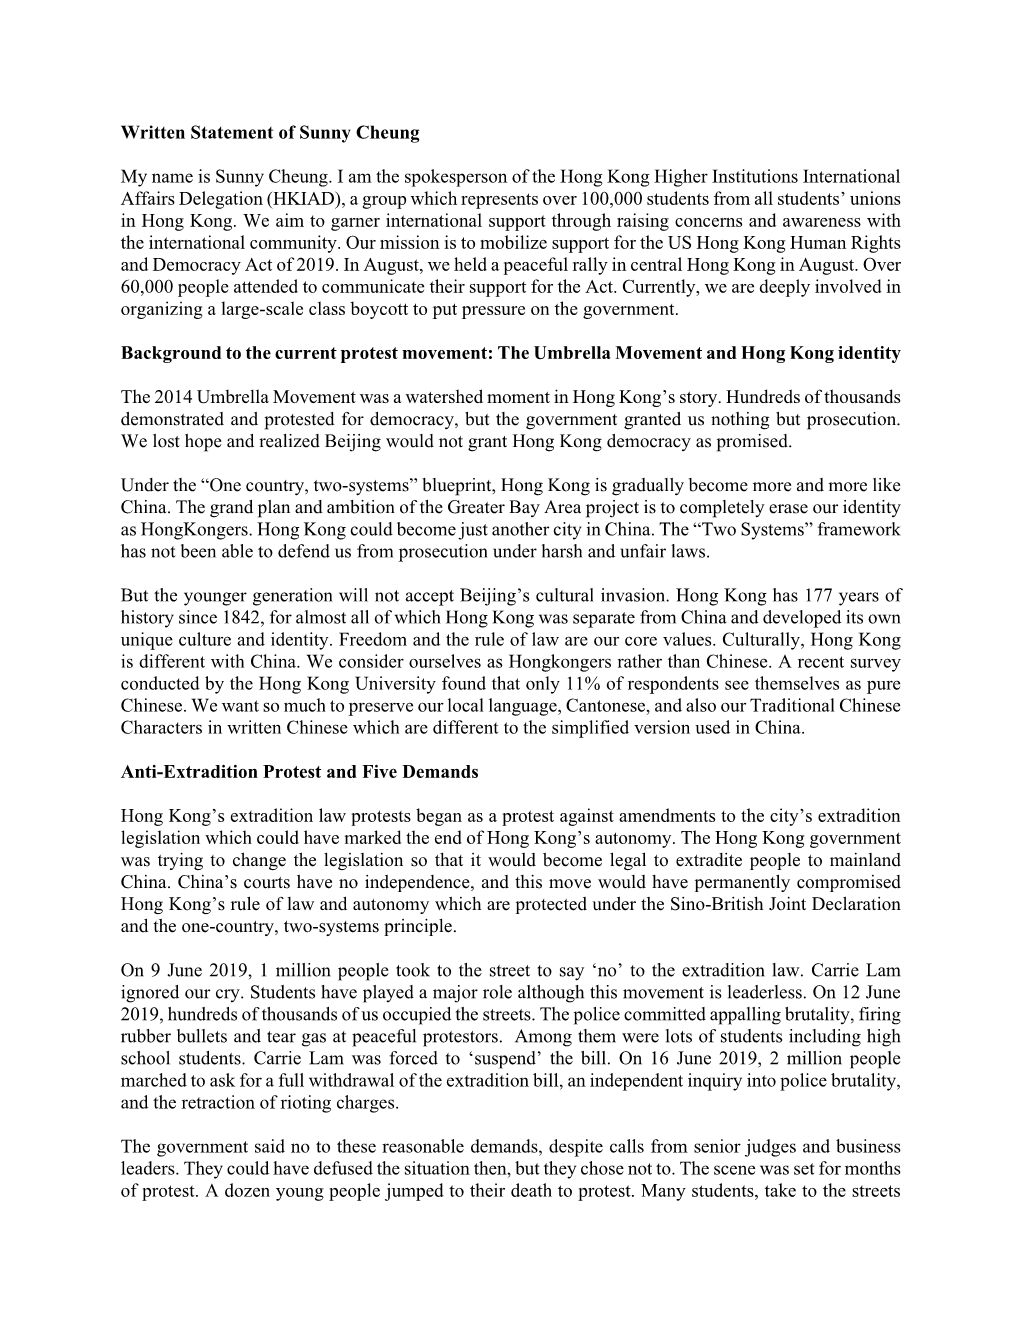 Written Statement of Sunny Cheung My Name Is Sunny Cheung. I Am the Spokesperson of the Hong Kong Higher Institutions Internatio